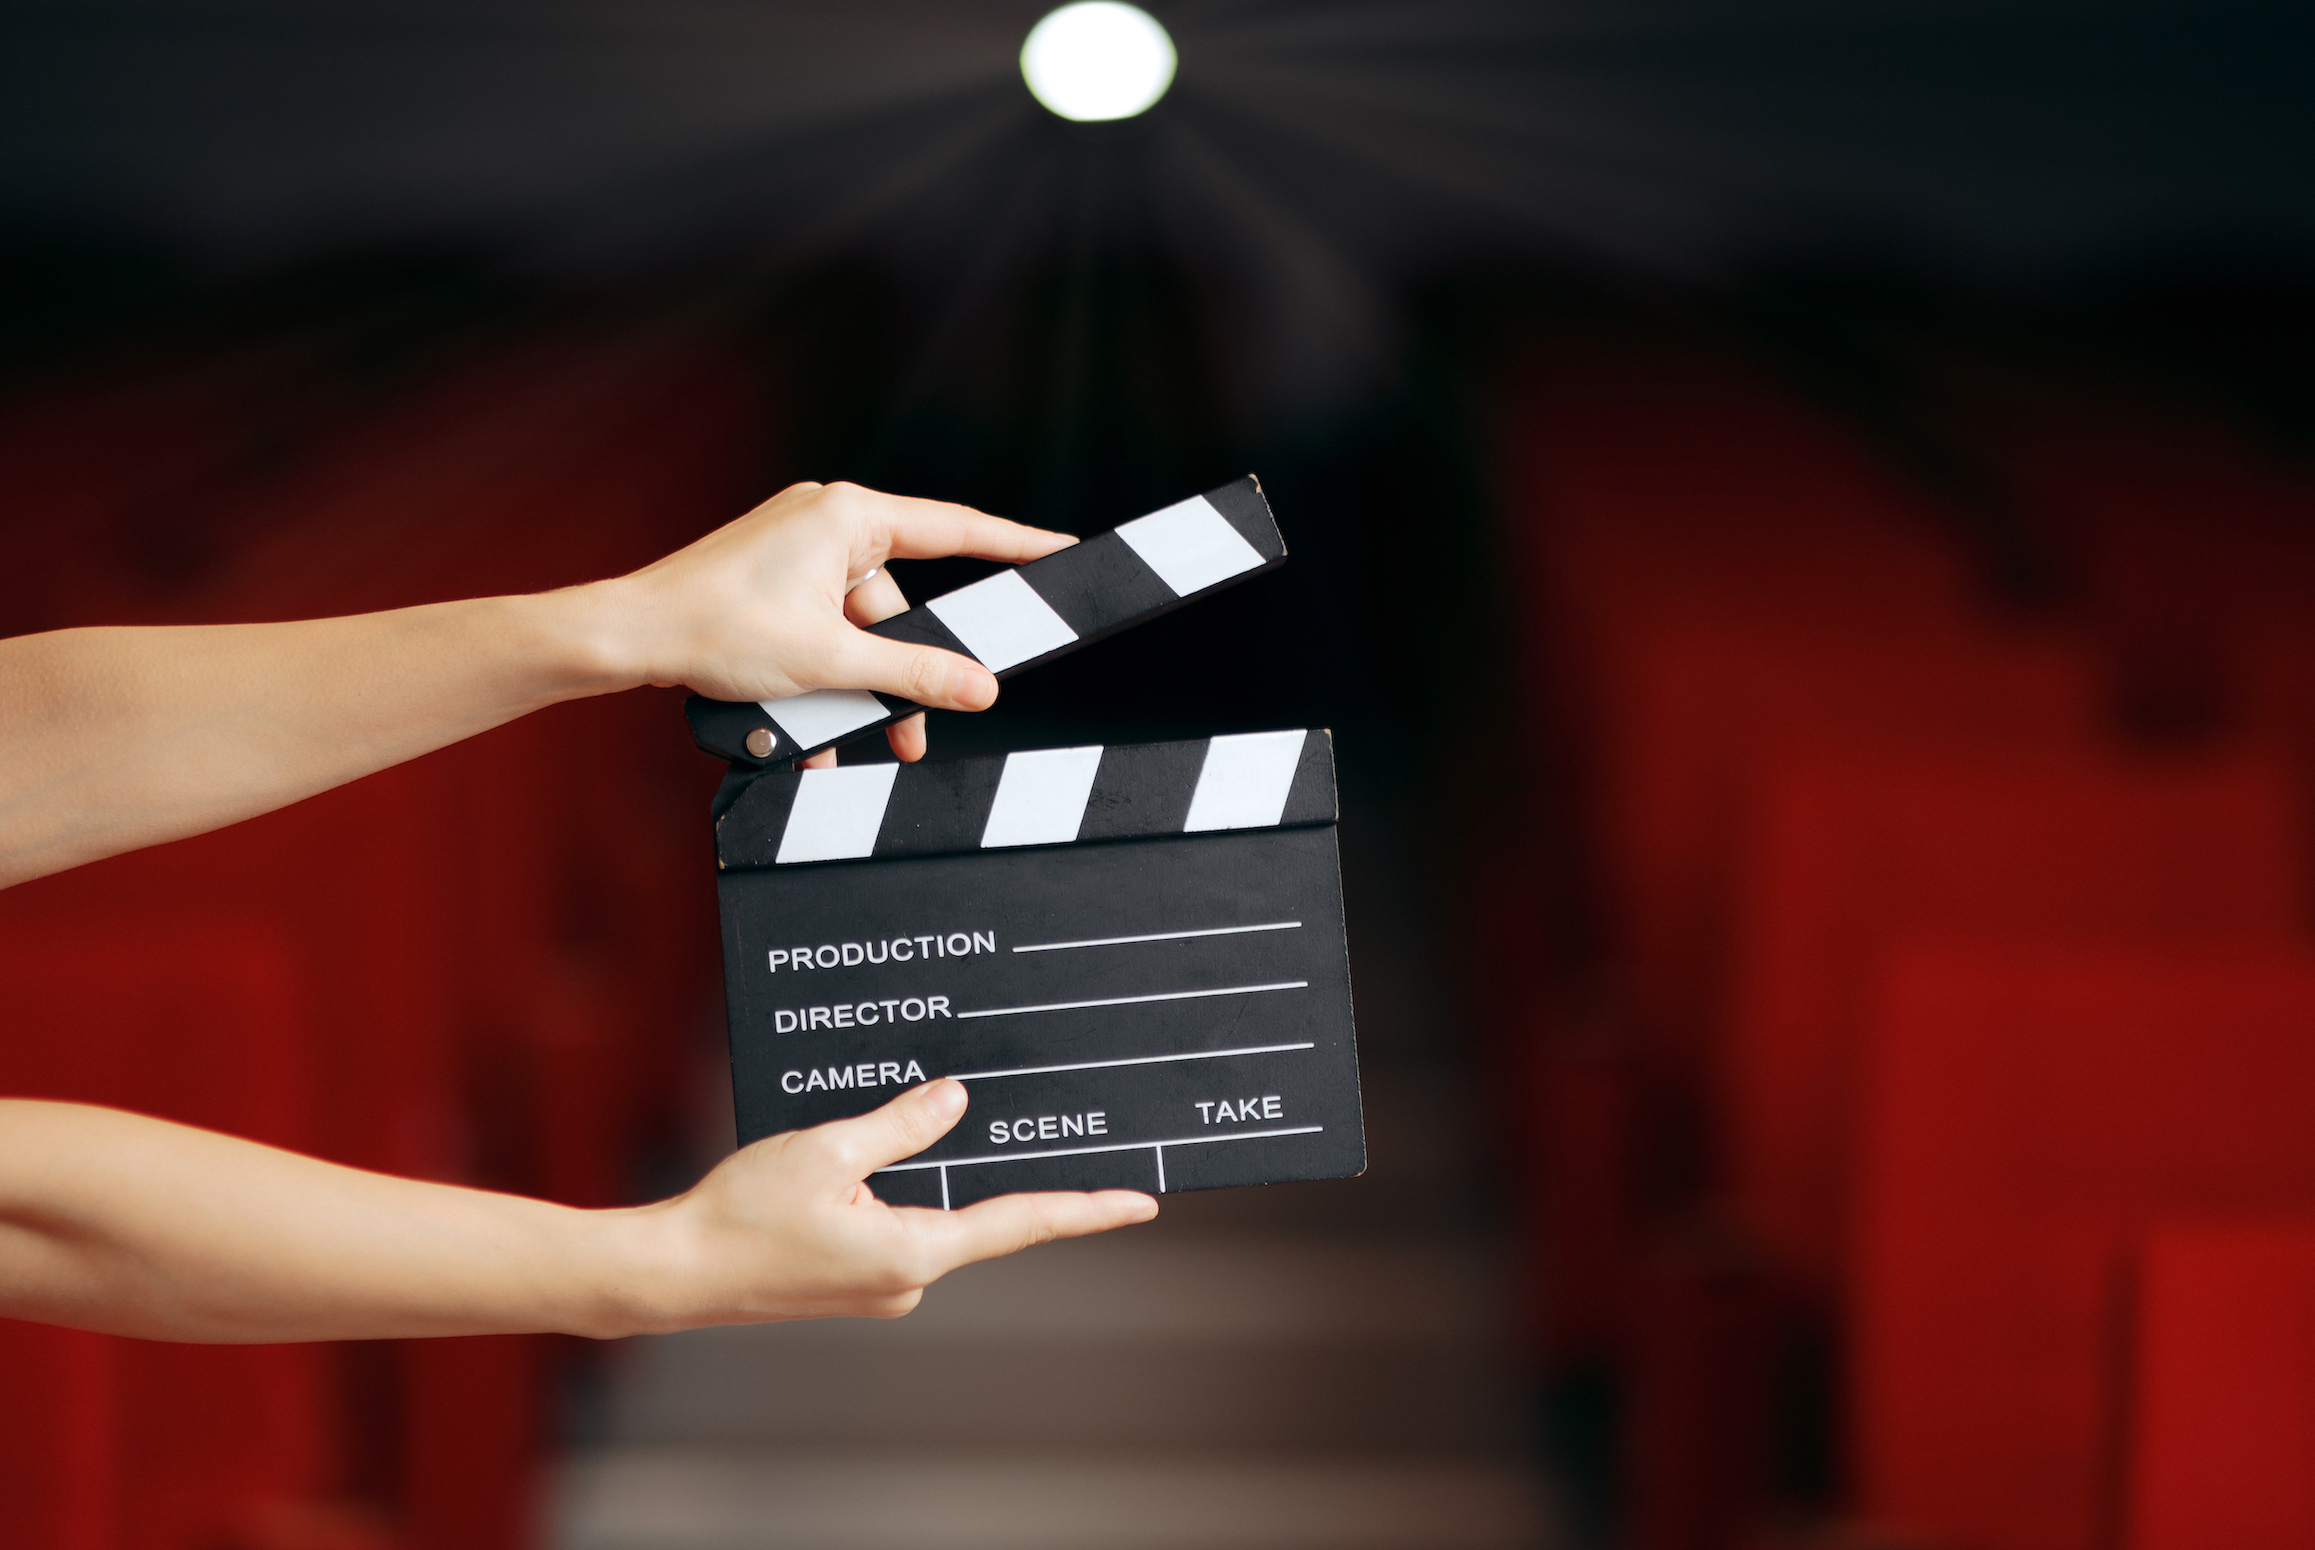 Hands holding a clapperboard in front of an empty theater